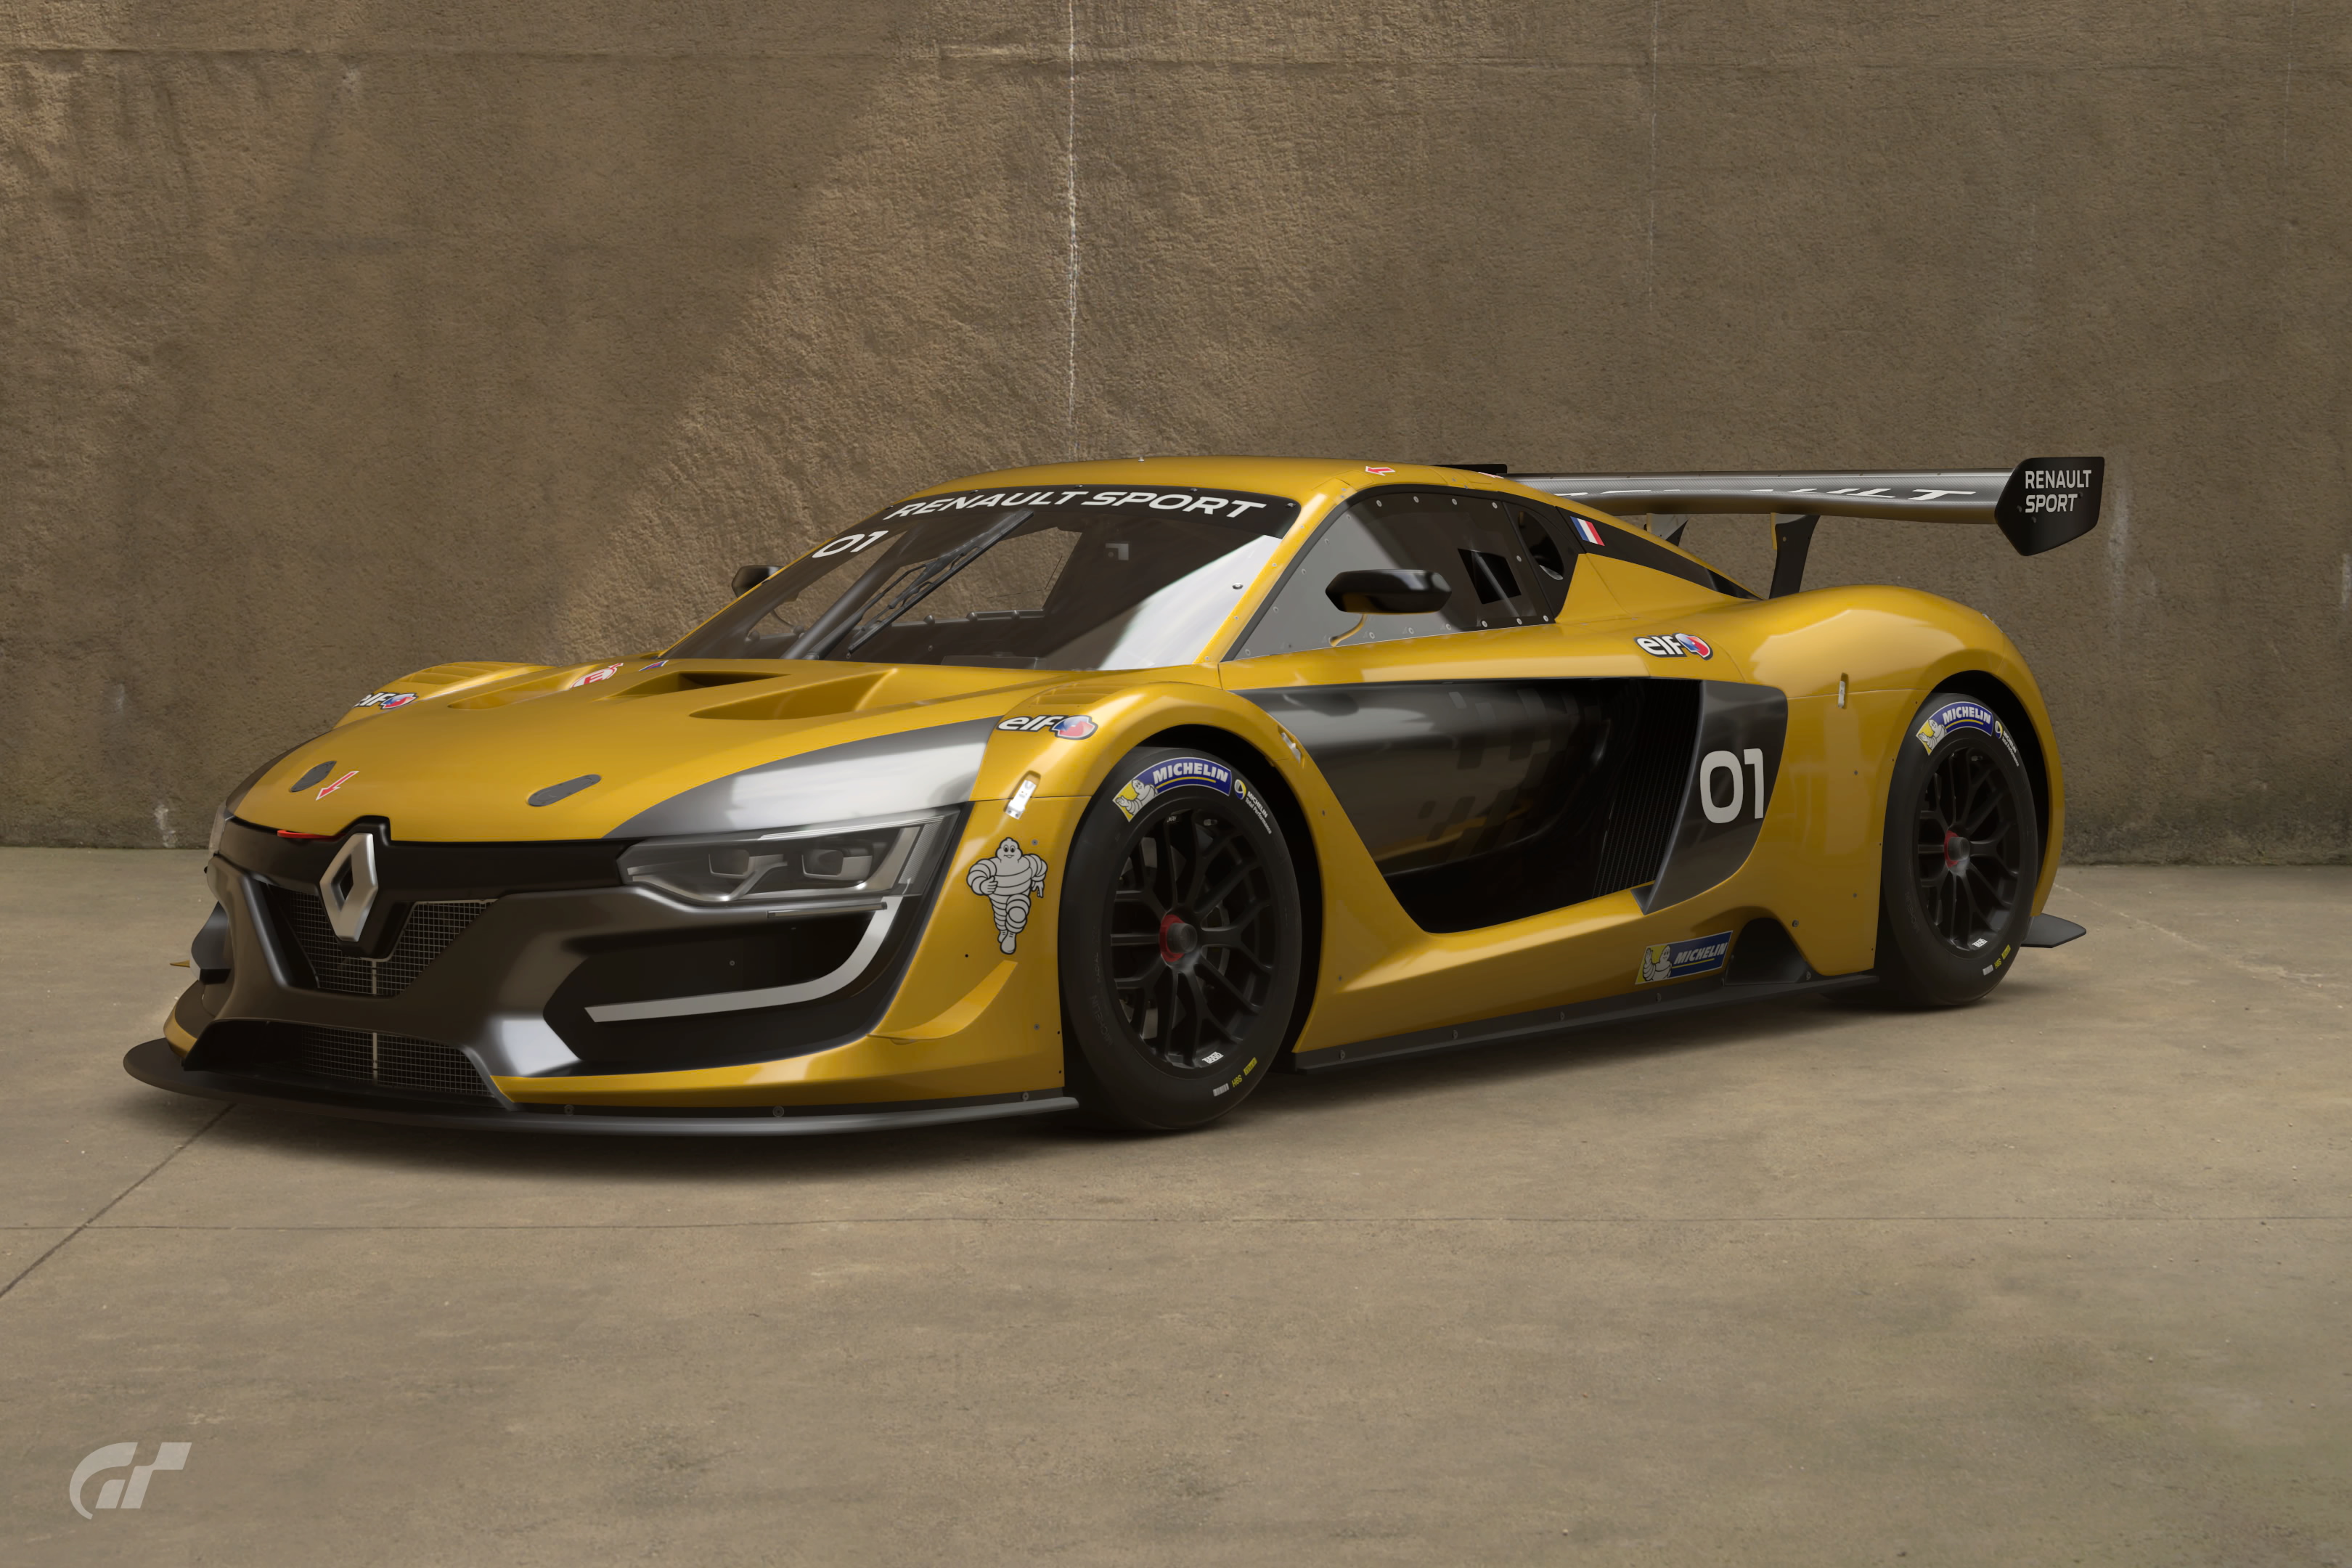 https://static.wikia.nocookie.net/gran-turismo/images/d/d4/Renault_Sport_R.S.01_%2716.jpg/revision/latest?cb=20220930193712